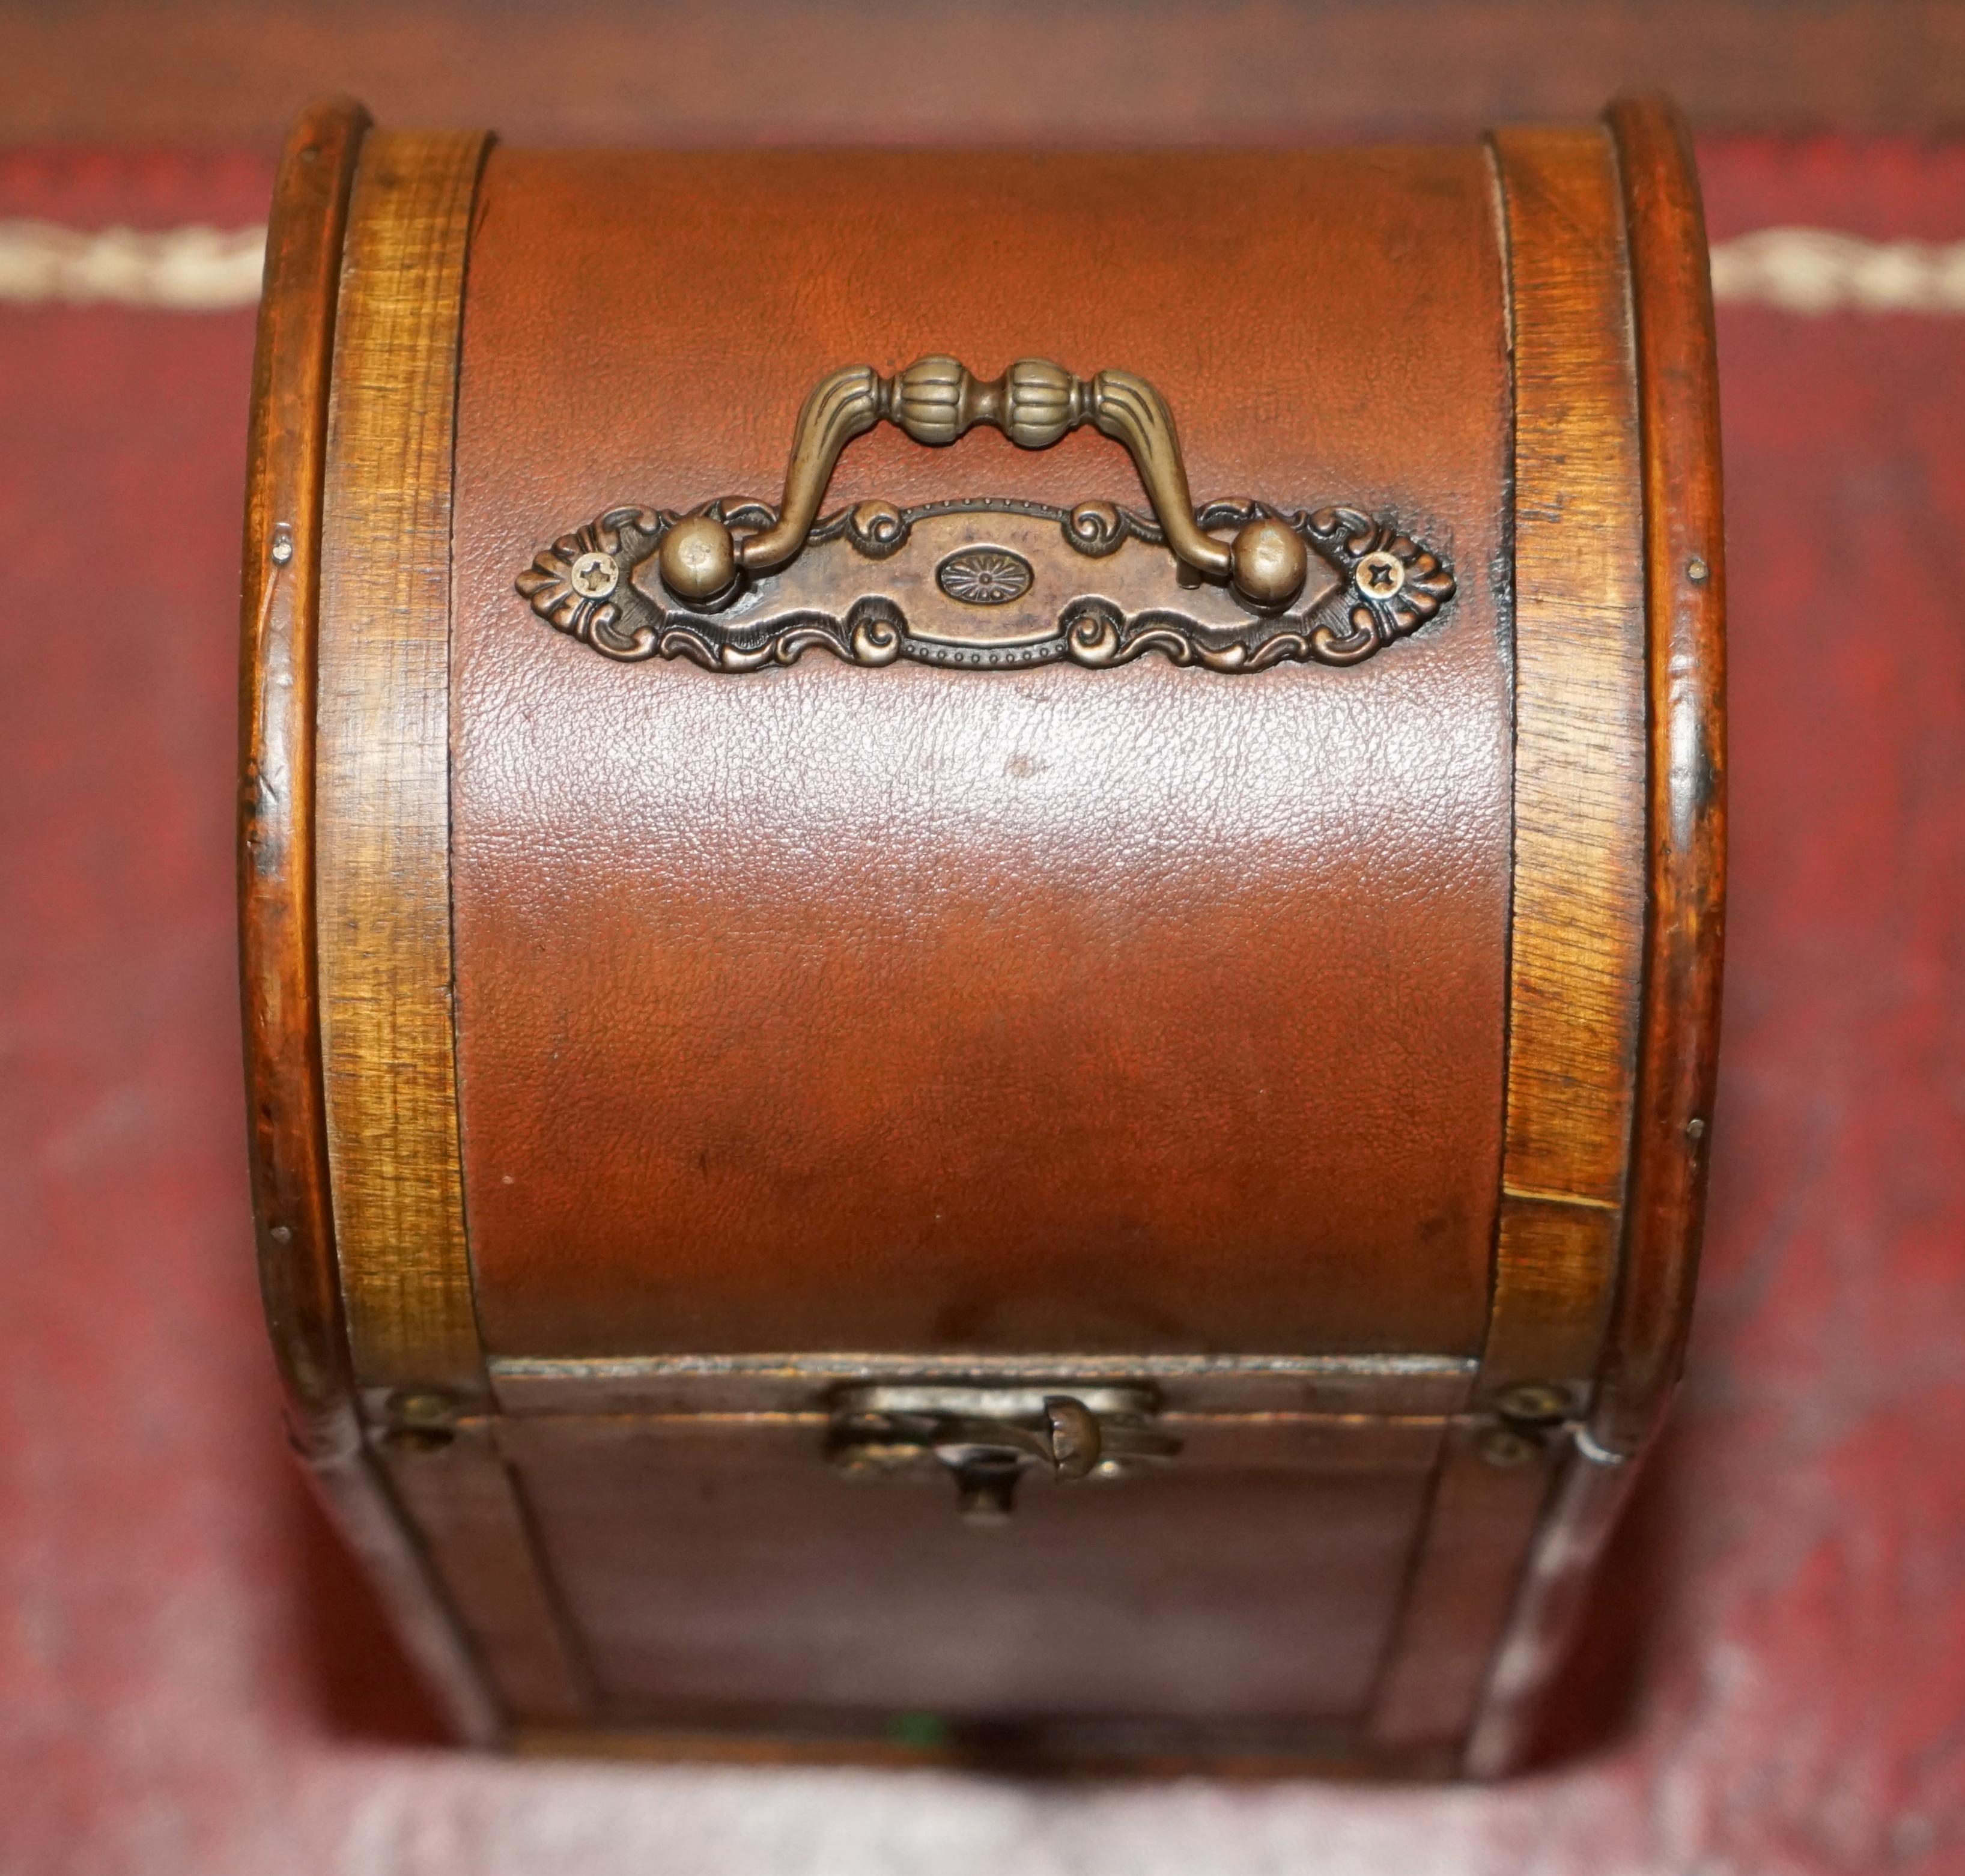 ViNTAGE HARDWOOD TRAVEL WINE BOX CASE WITH HANDLE VERY DECORATIVE PIECE For Sale 4